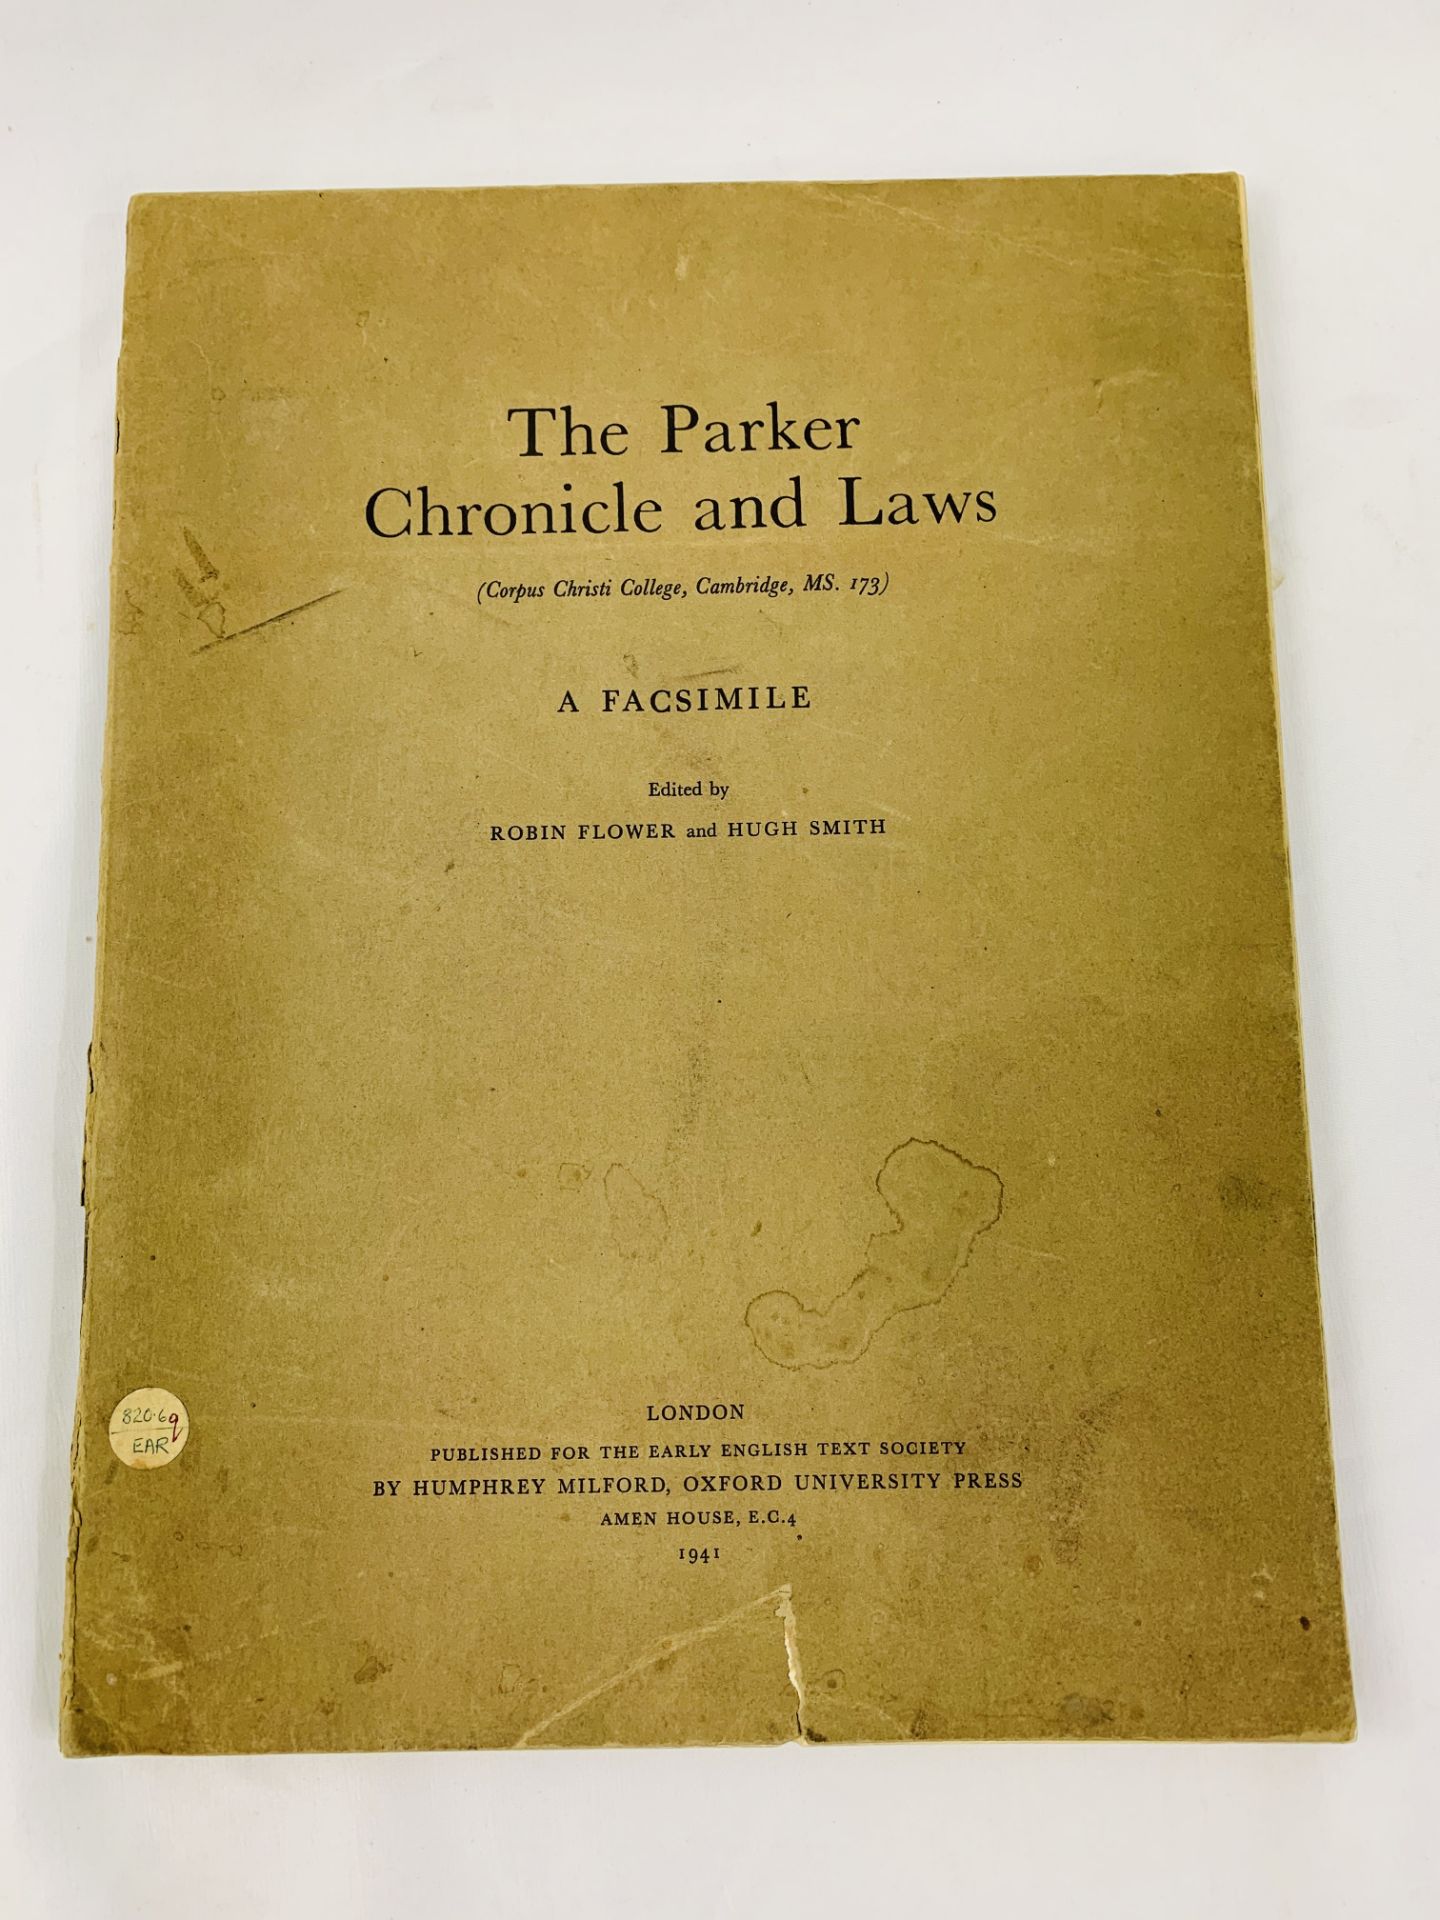 The Parker Chronicle and Laws, 1941.